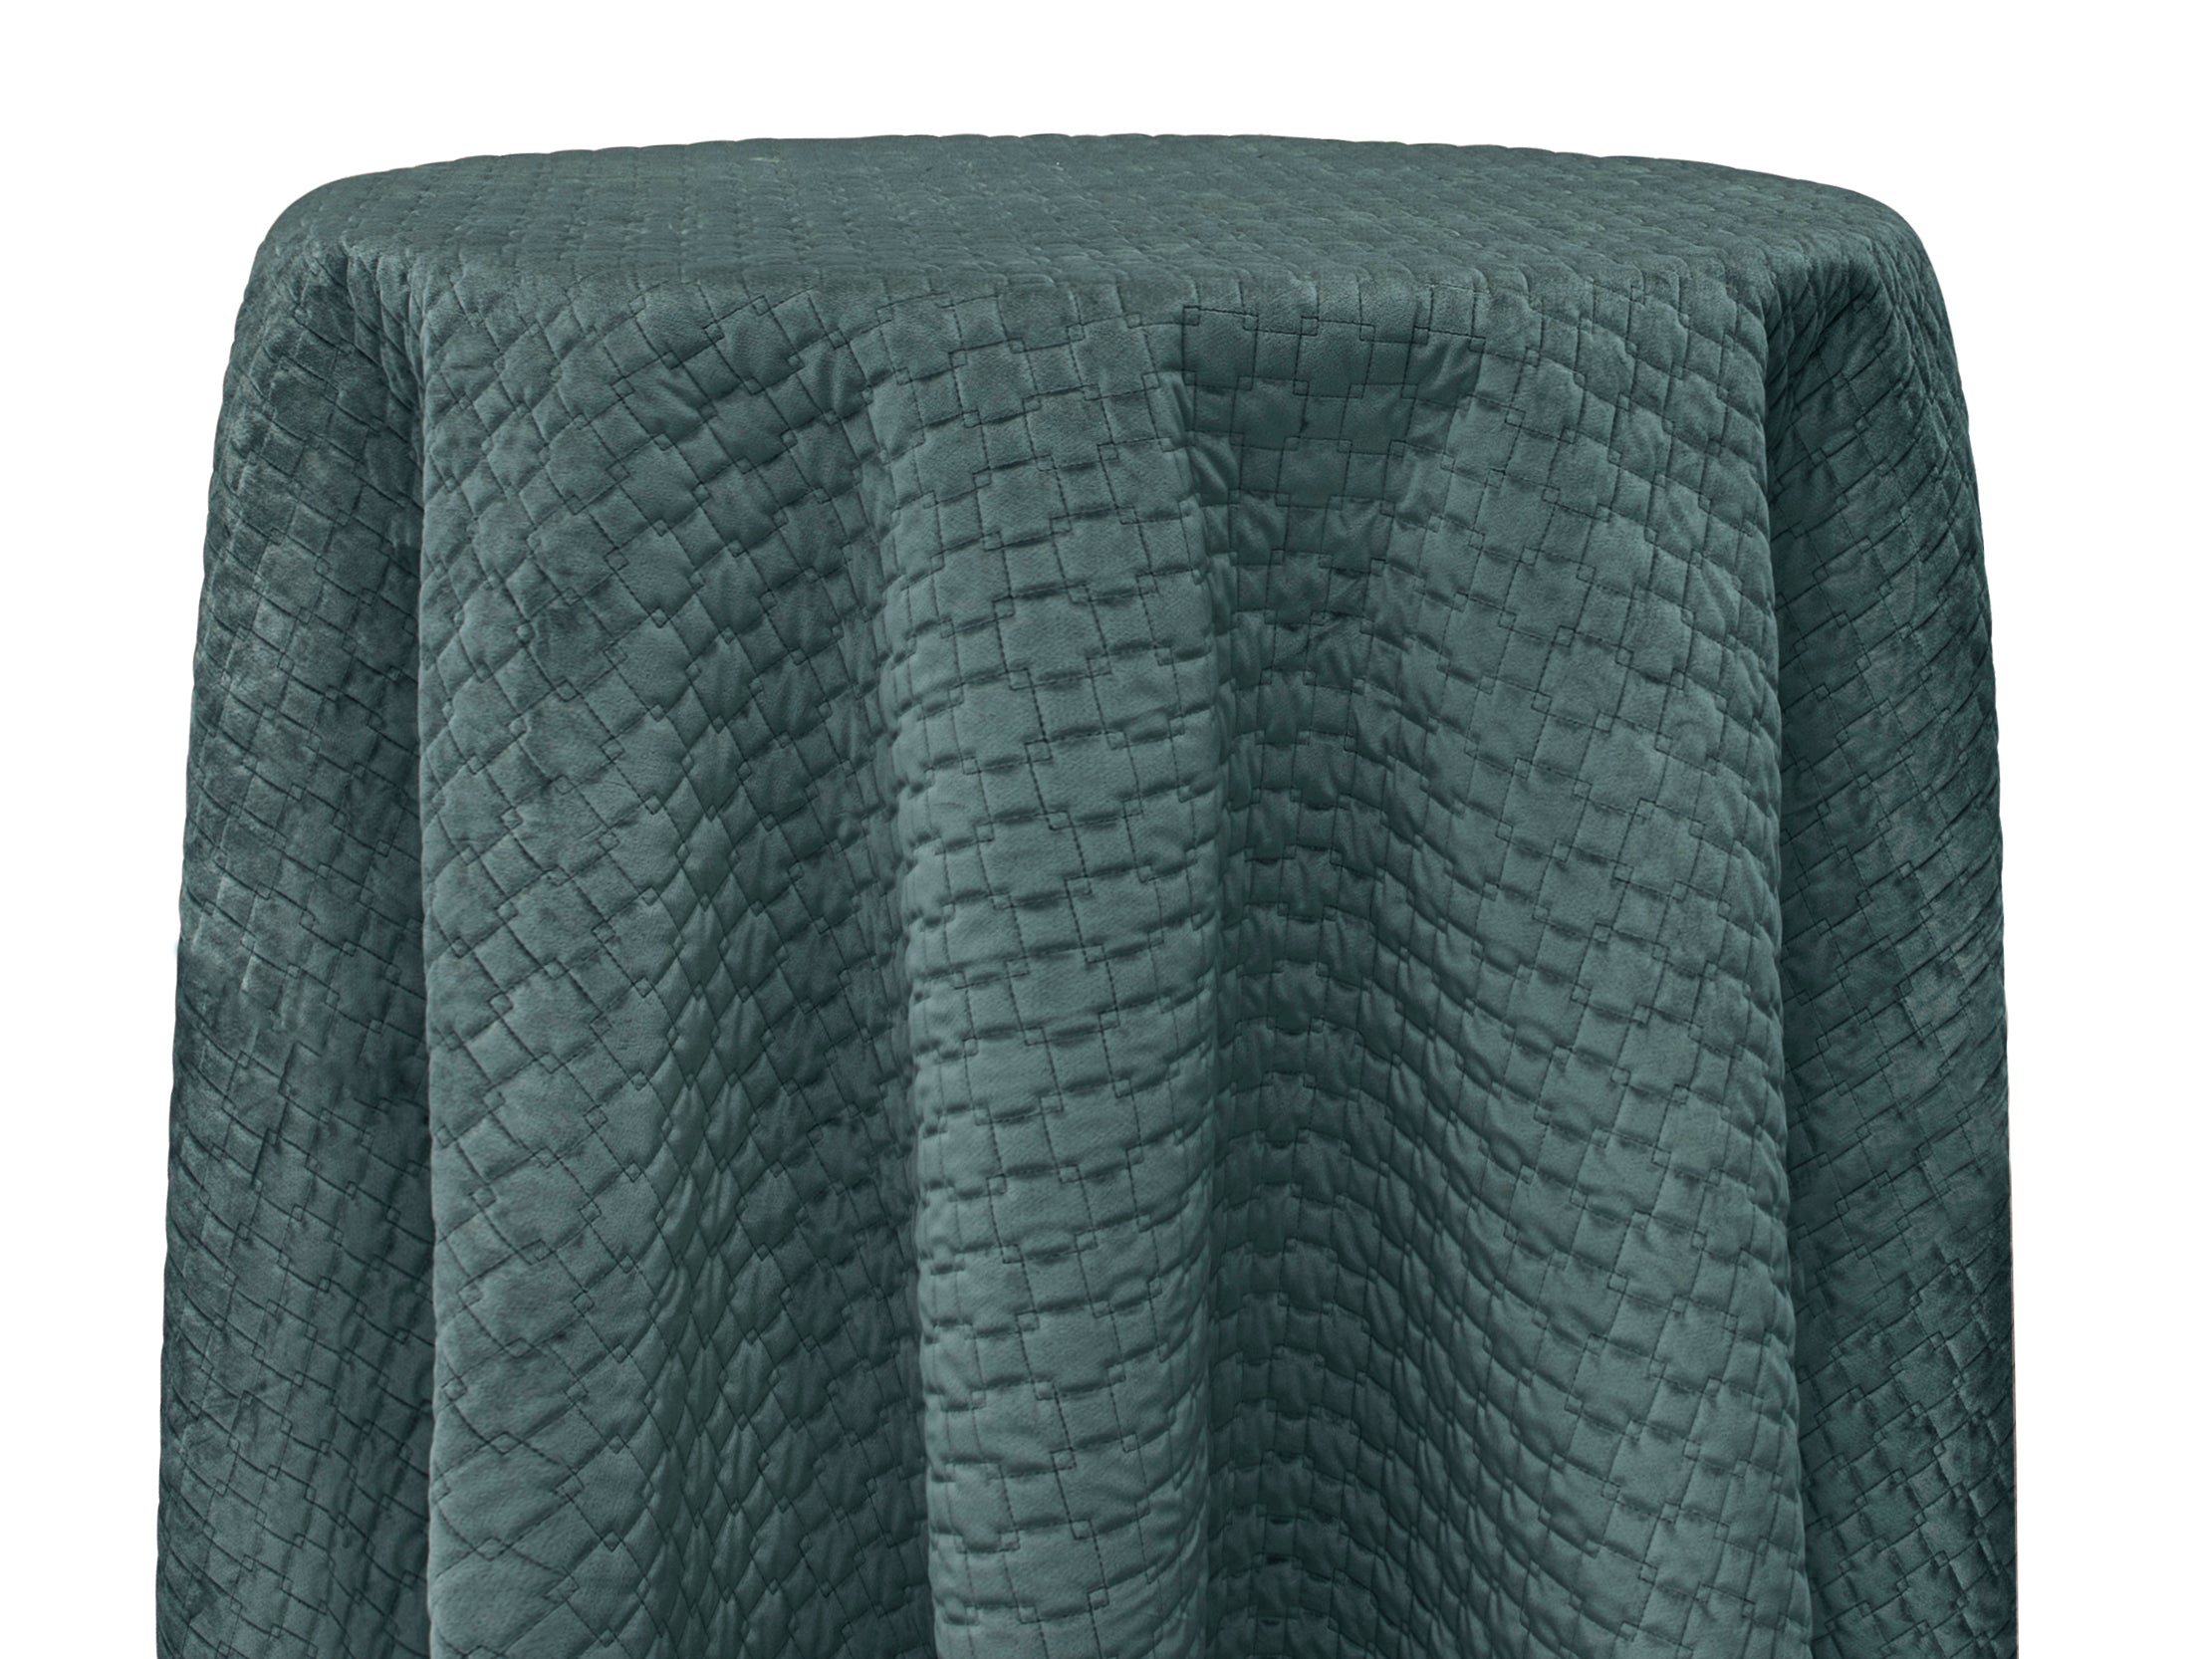 Tablecloth Quilt Square Teal